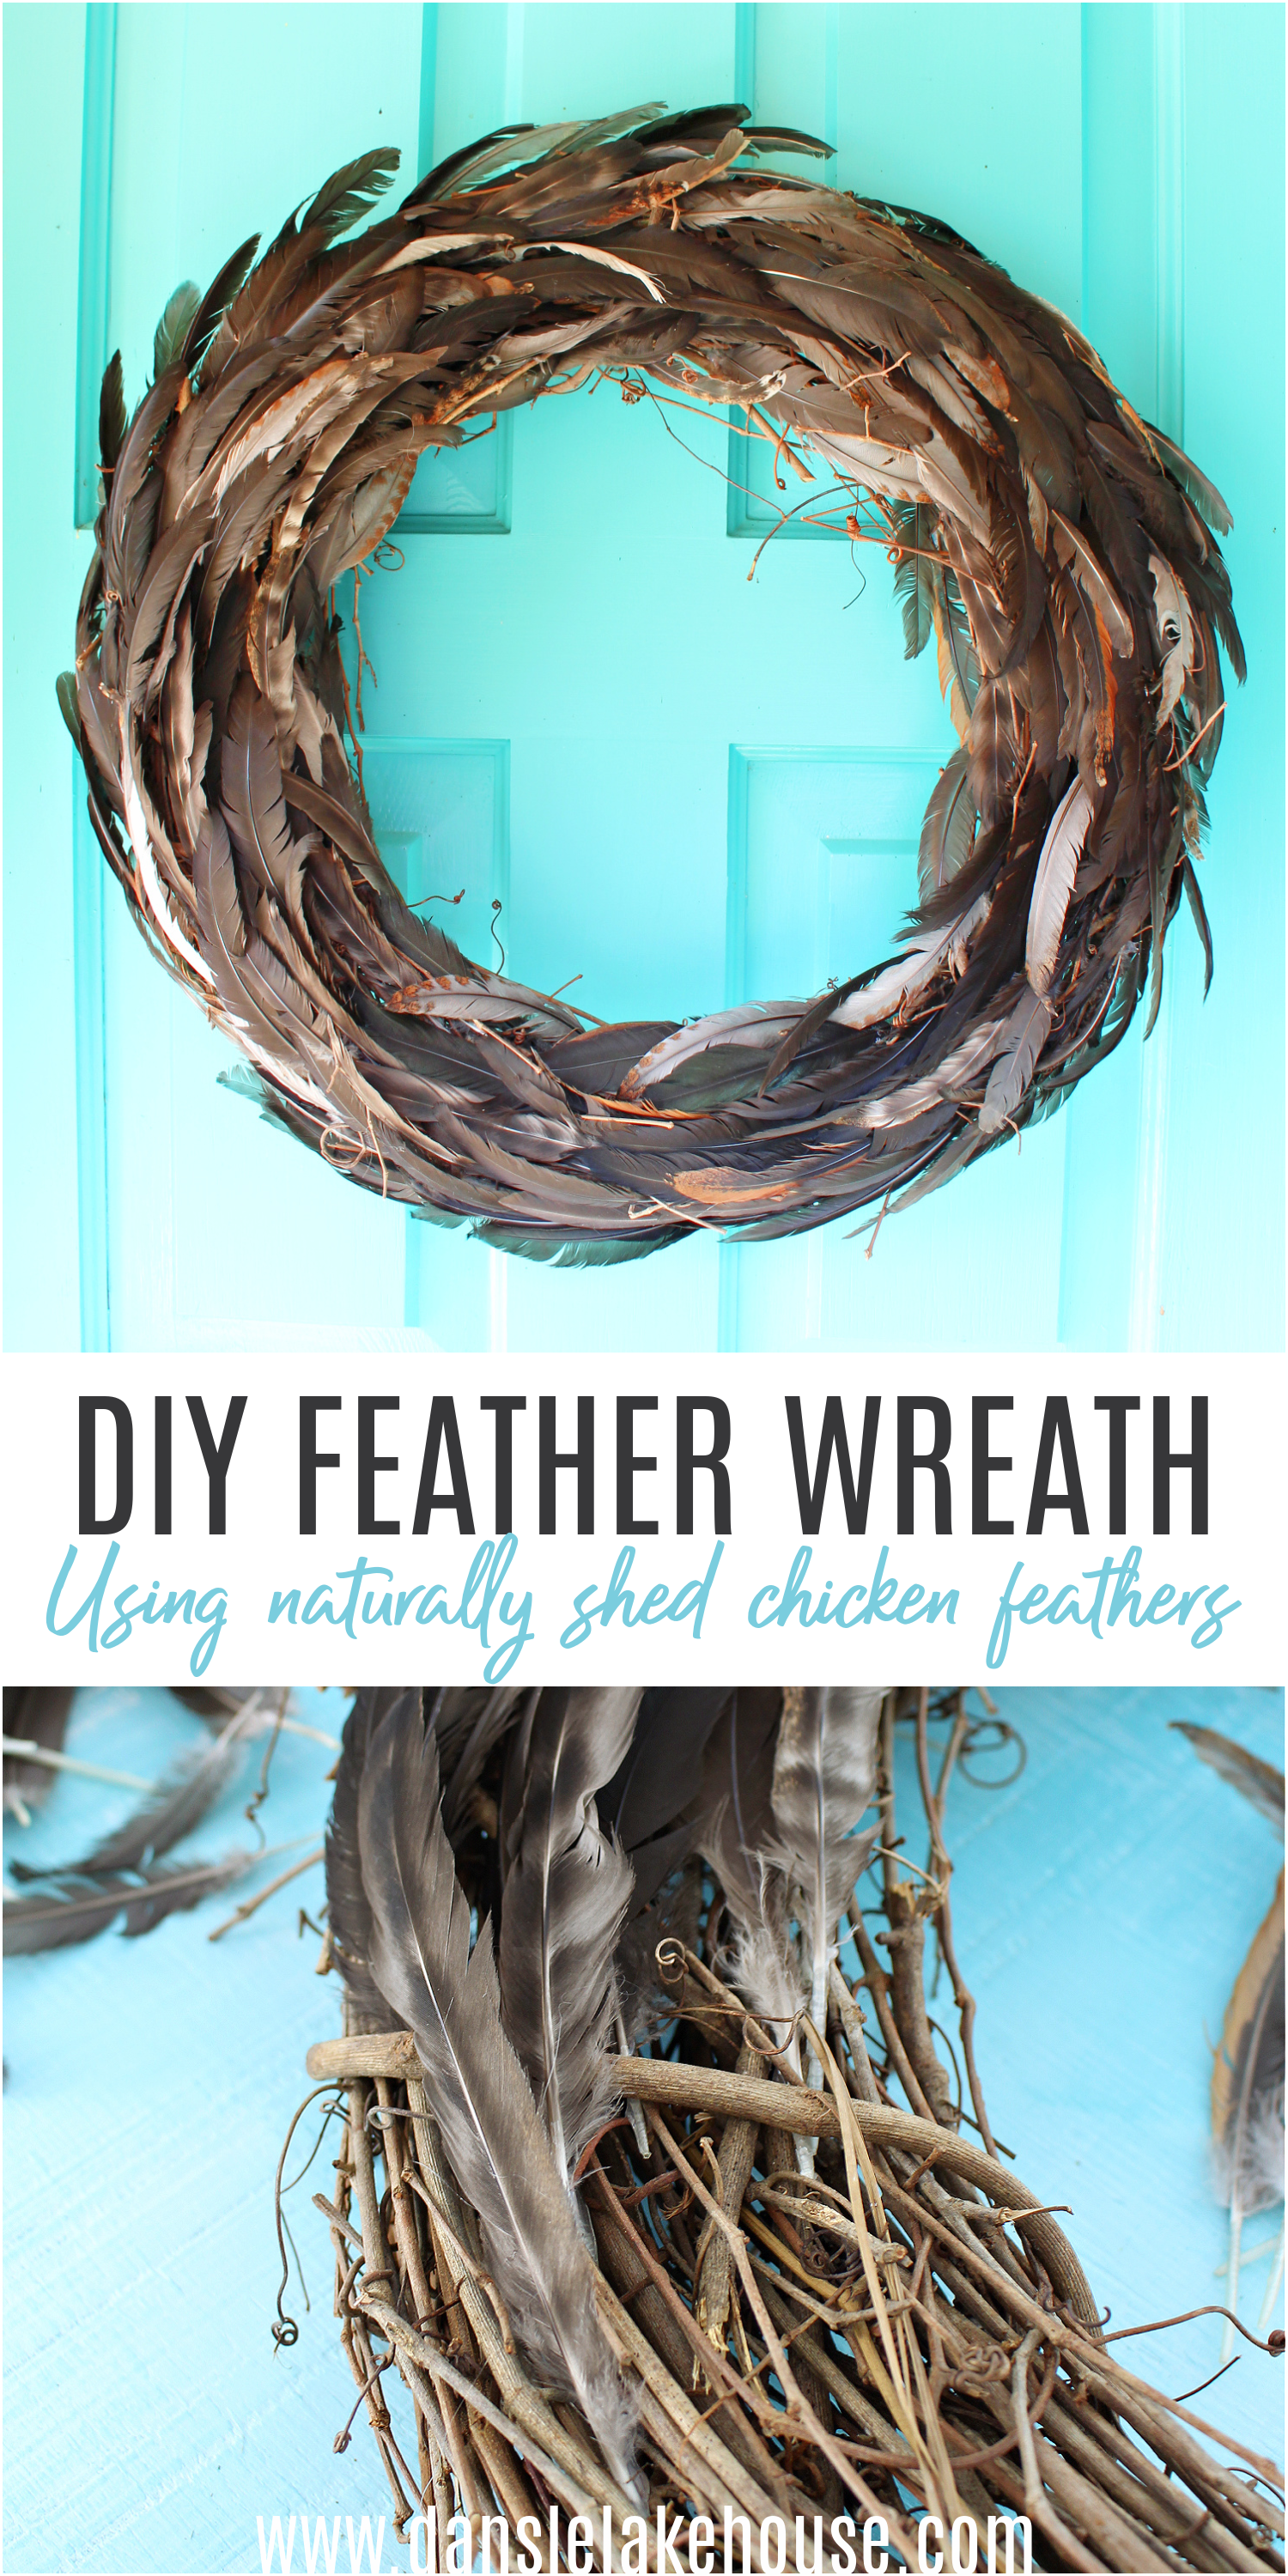 DIY Feather Wreath Tutorial (Using Chicken Feathers)